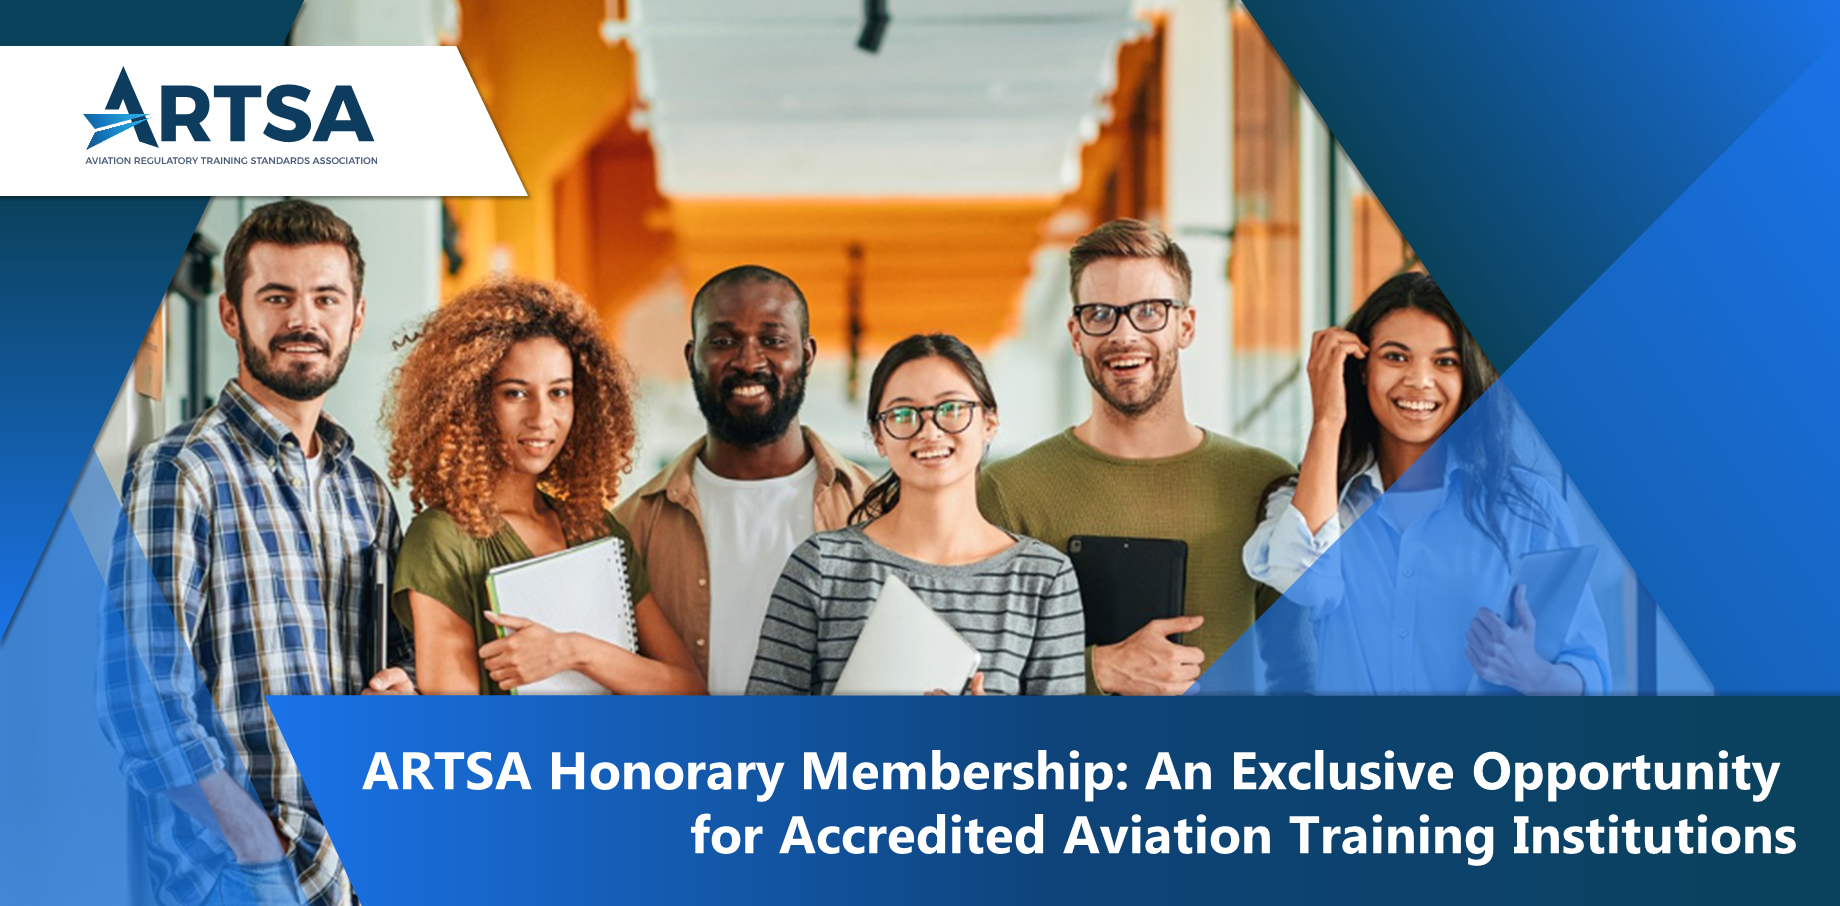 Aviation Regulatory Training Standards Association (ARTSA) Honorary Membership: An Exclusive Opportunity for Accredited Aviation Training Institutions